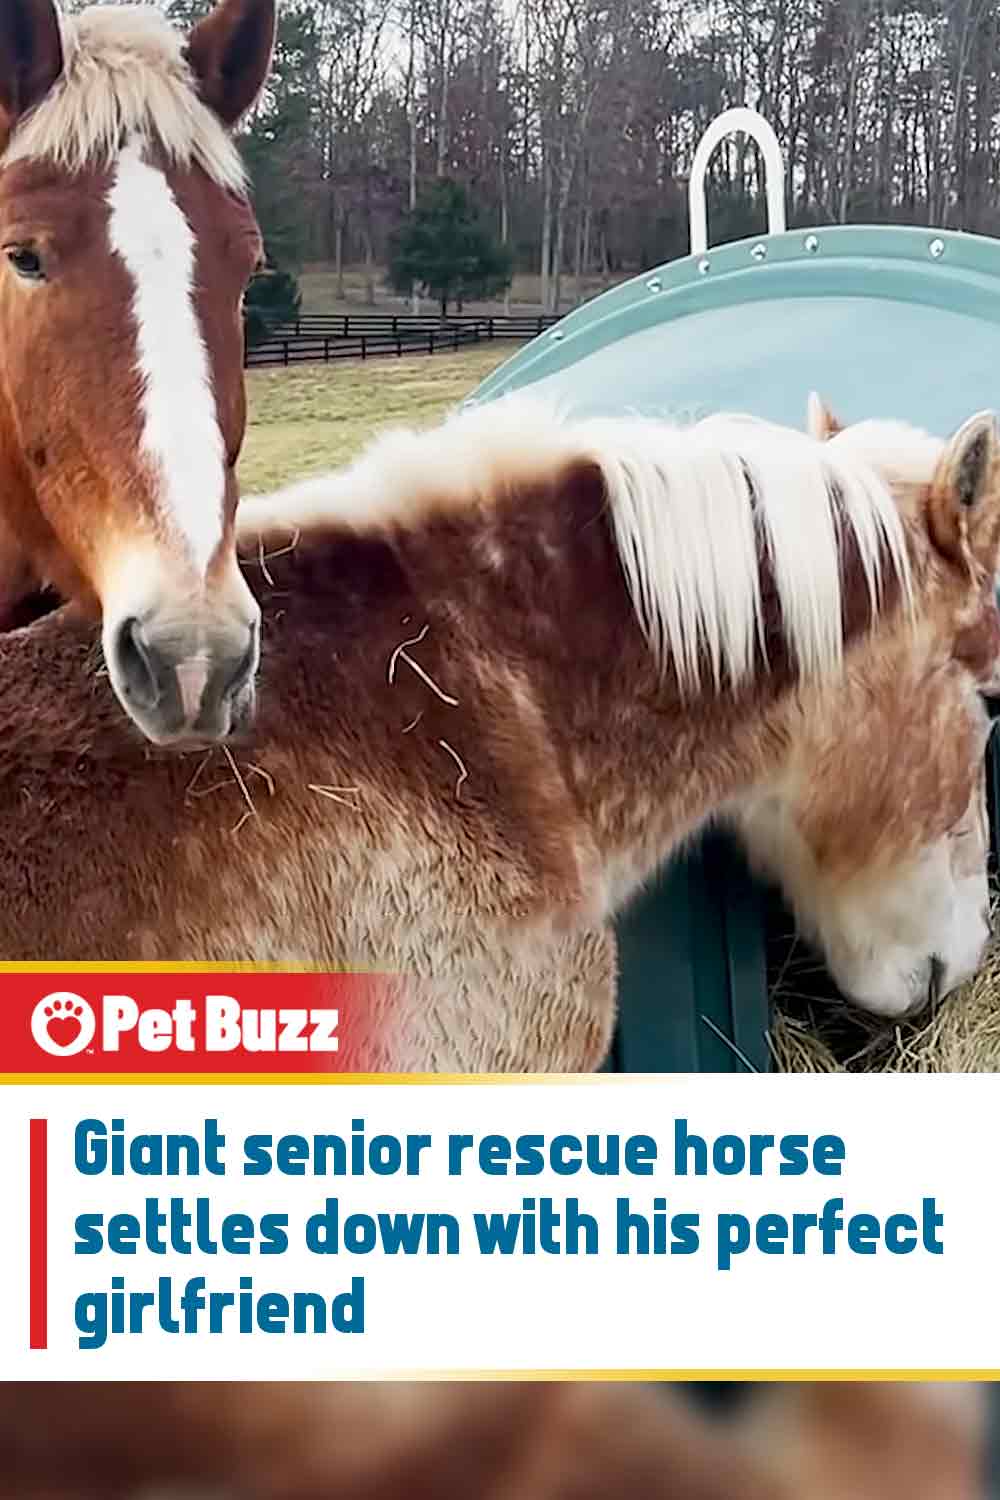 Giant senior rescue horse settles down with his perfect girlfriend